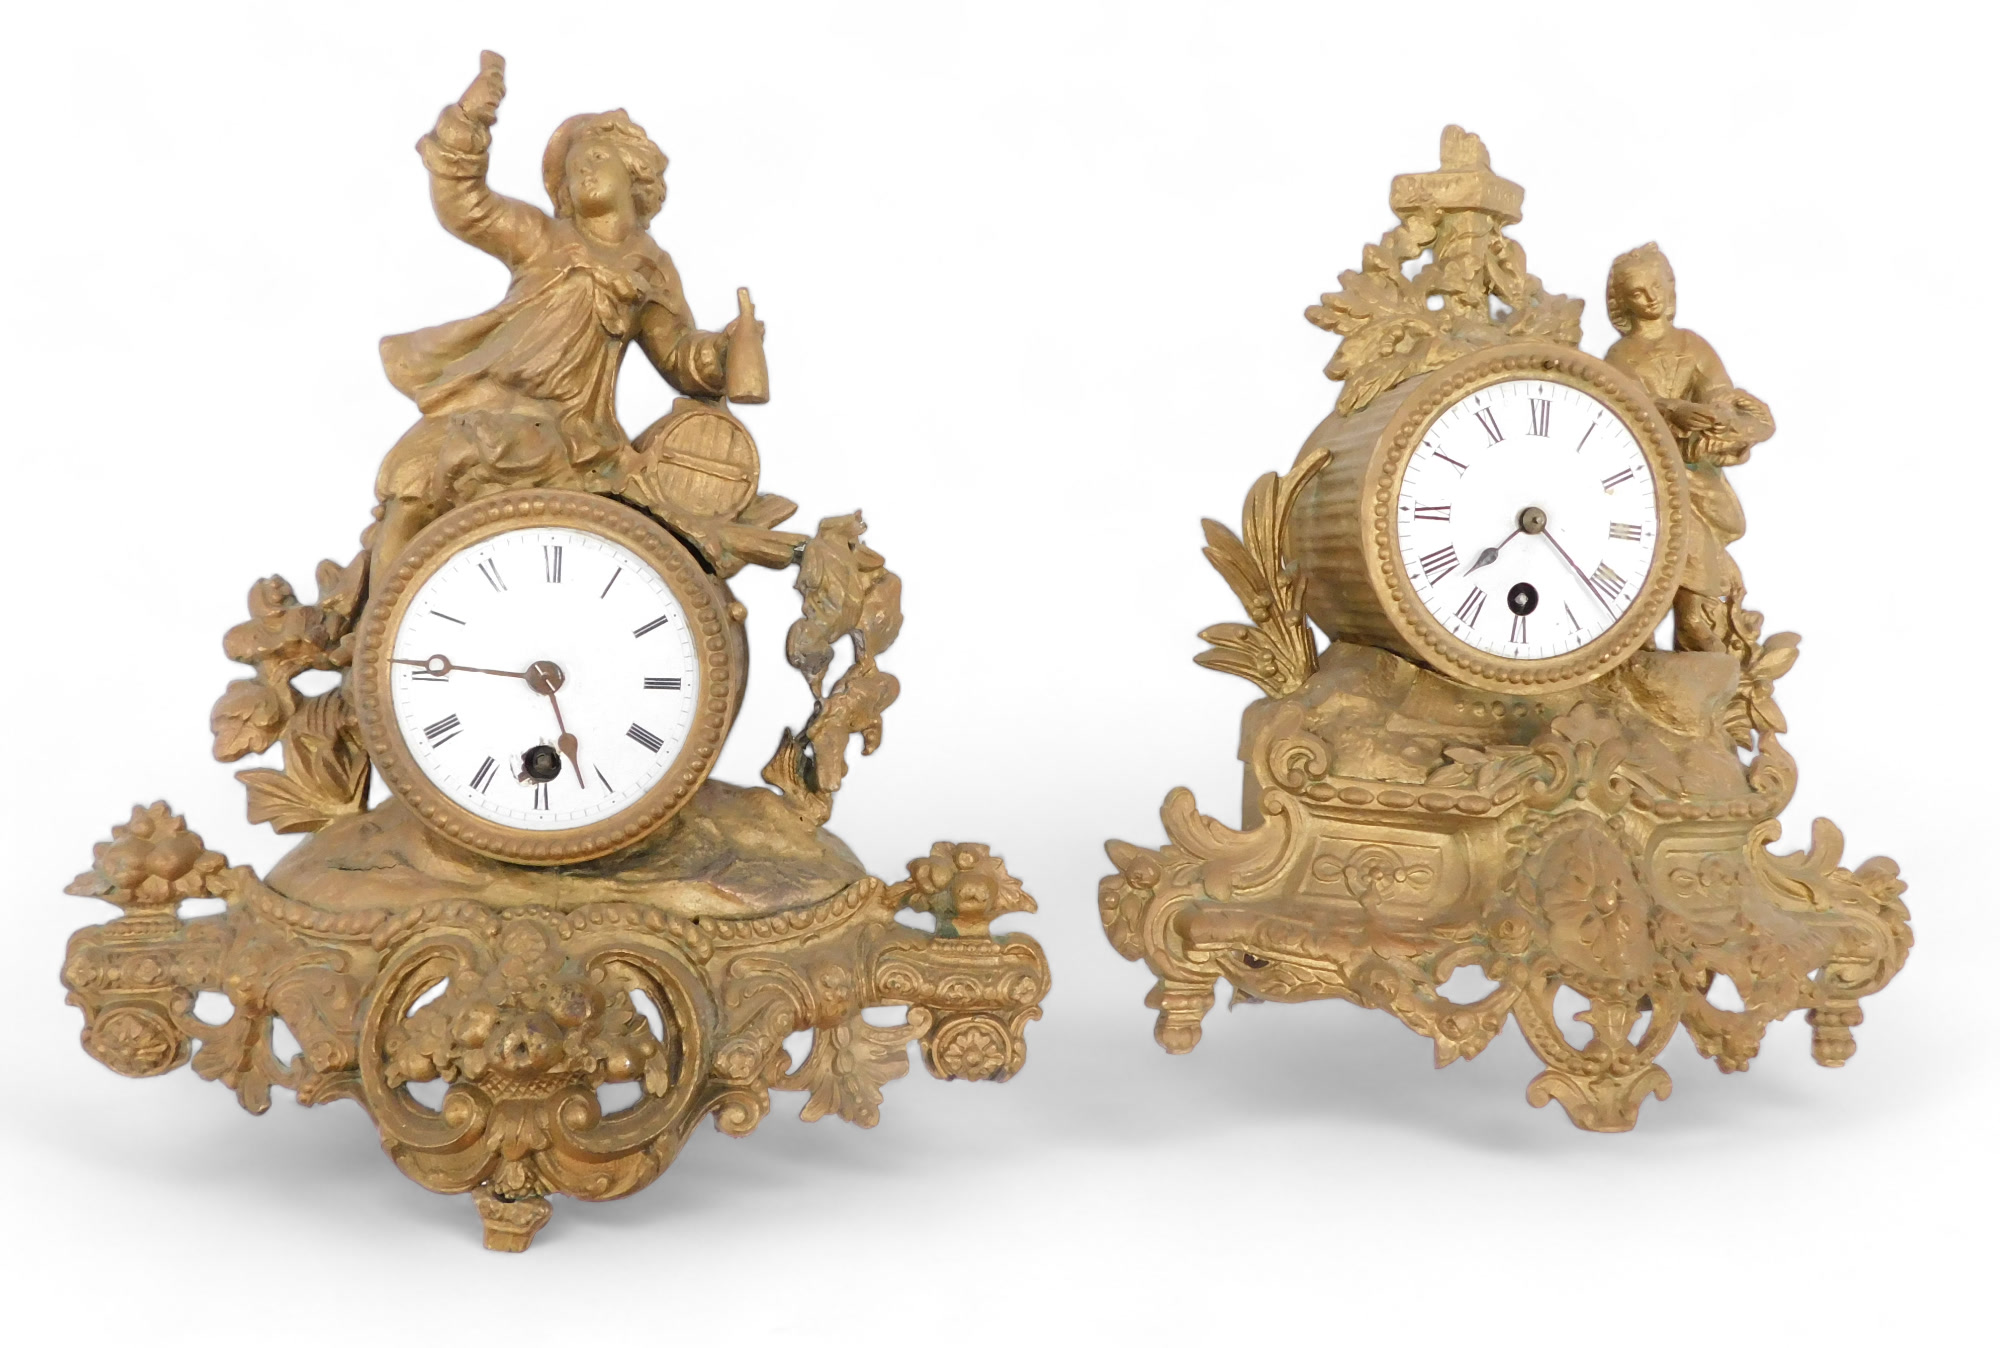 Two late 19th/early 20thC French gilt metal figural mantel clocks, each with a white enamel dial, bo